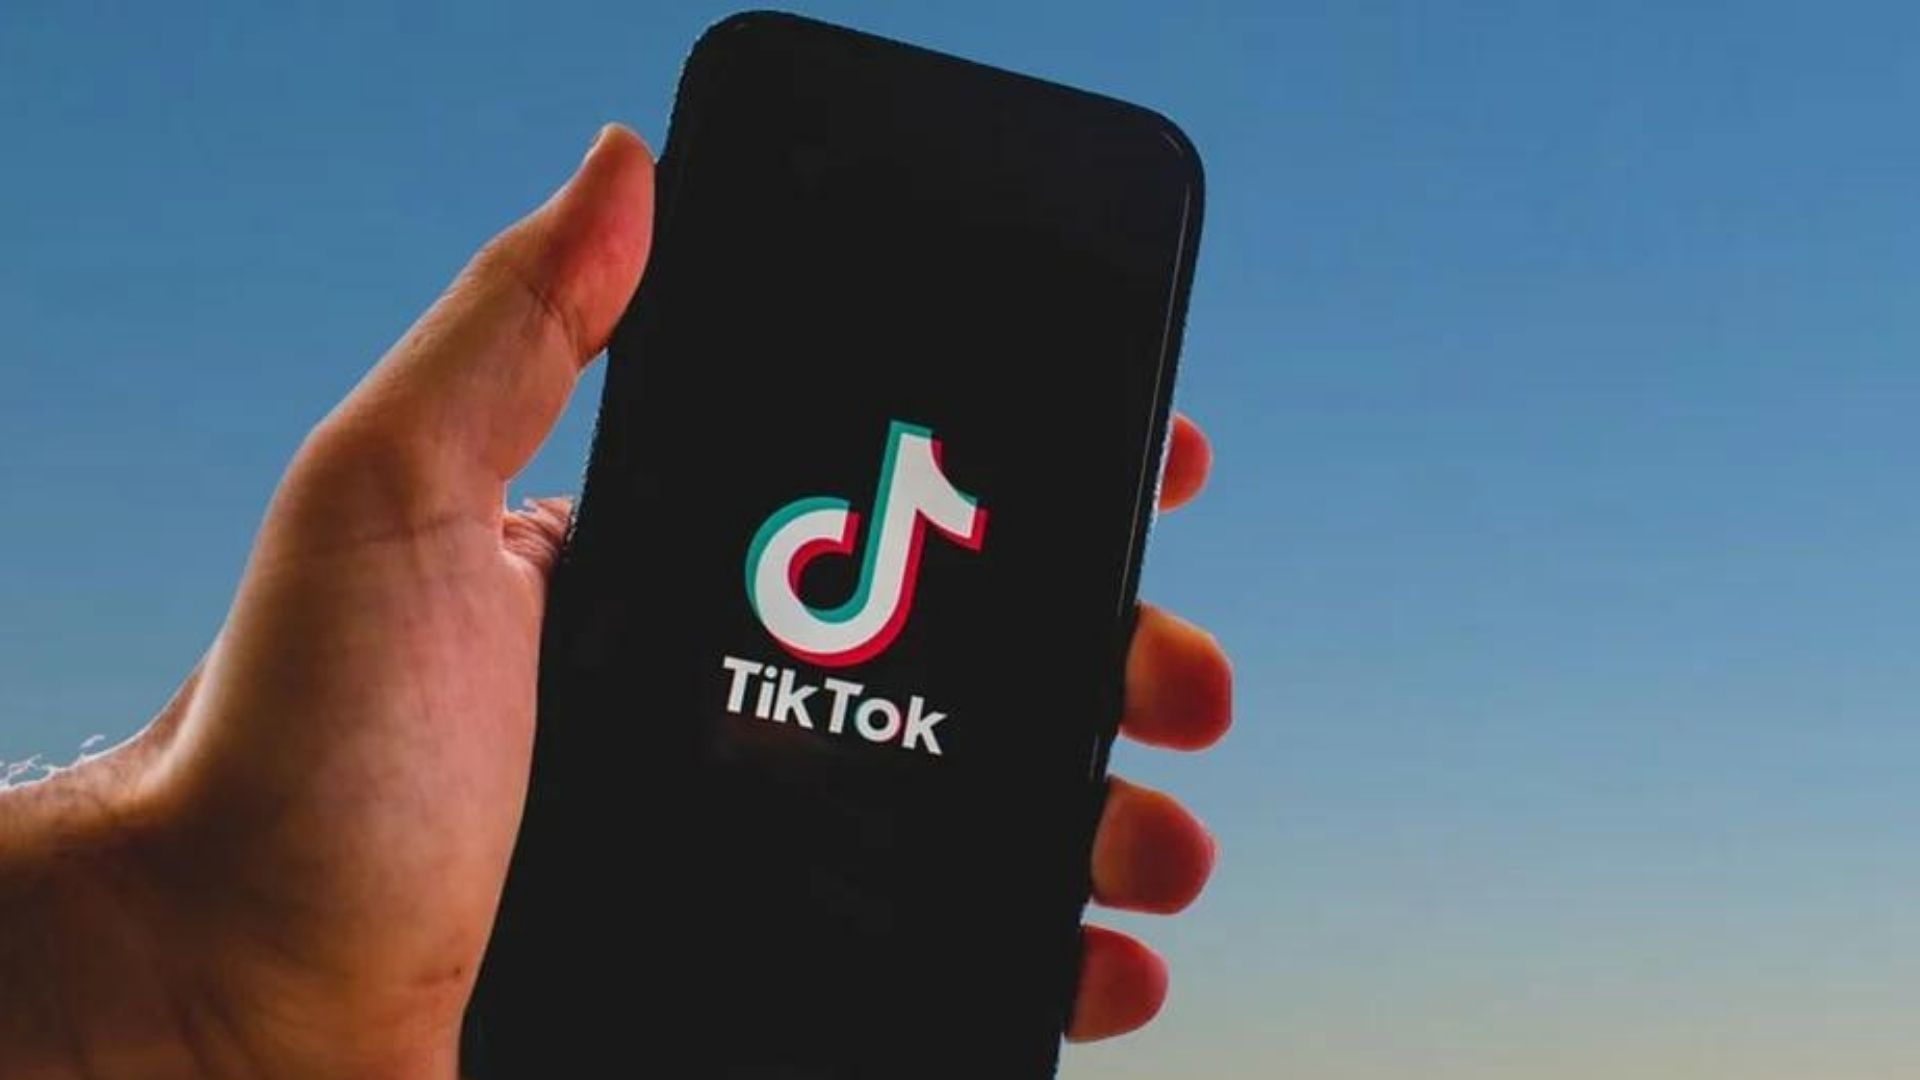 TikTok in an article about videos for a website